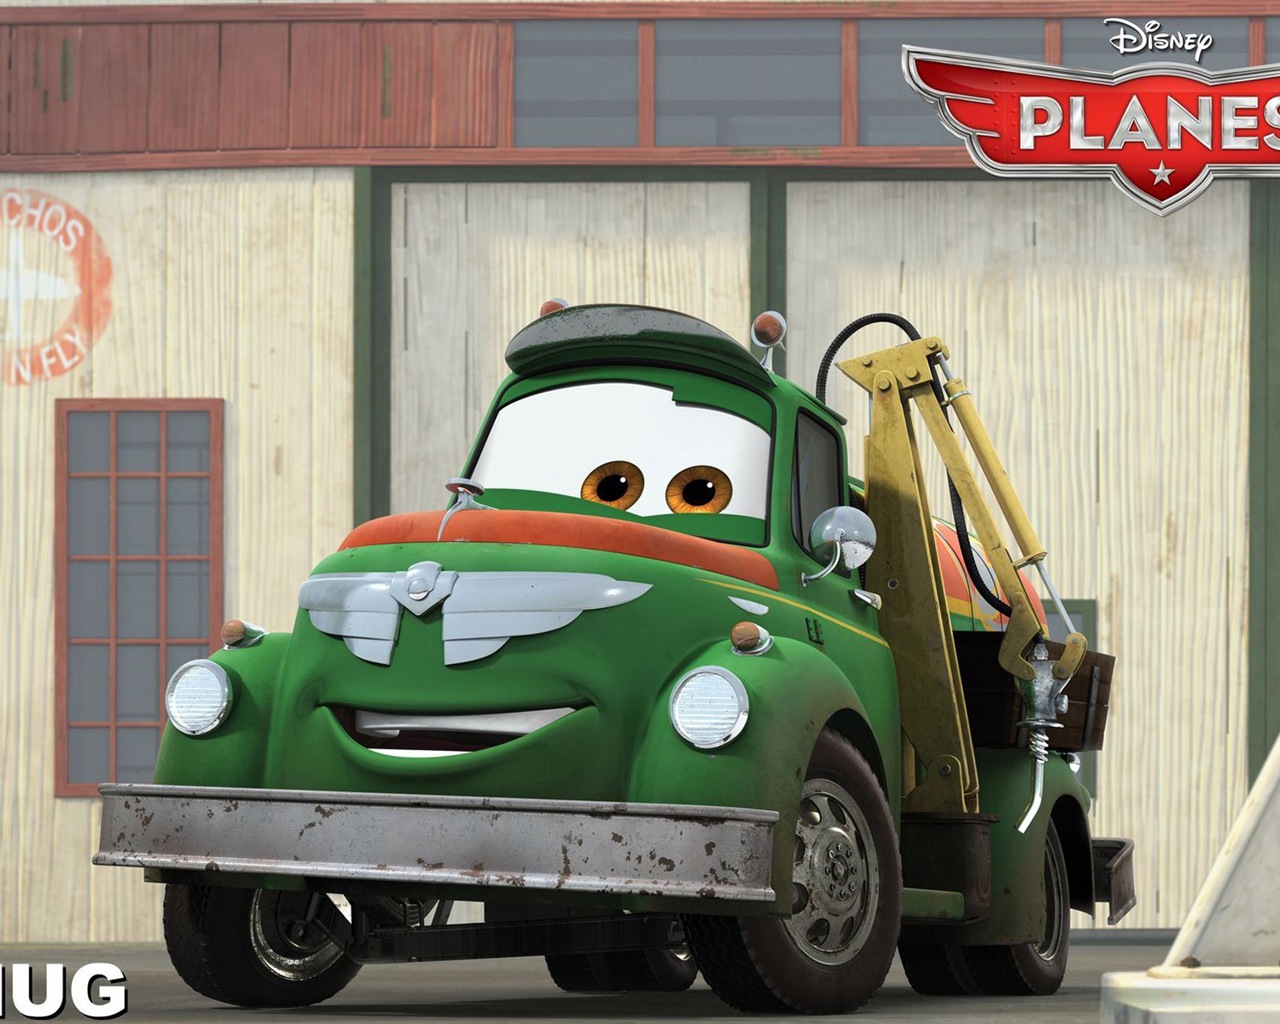 Planes 2013 HD wallpapers #10 - 1280x1024